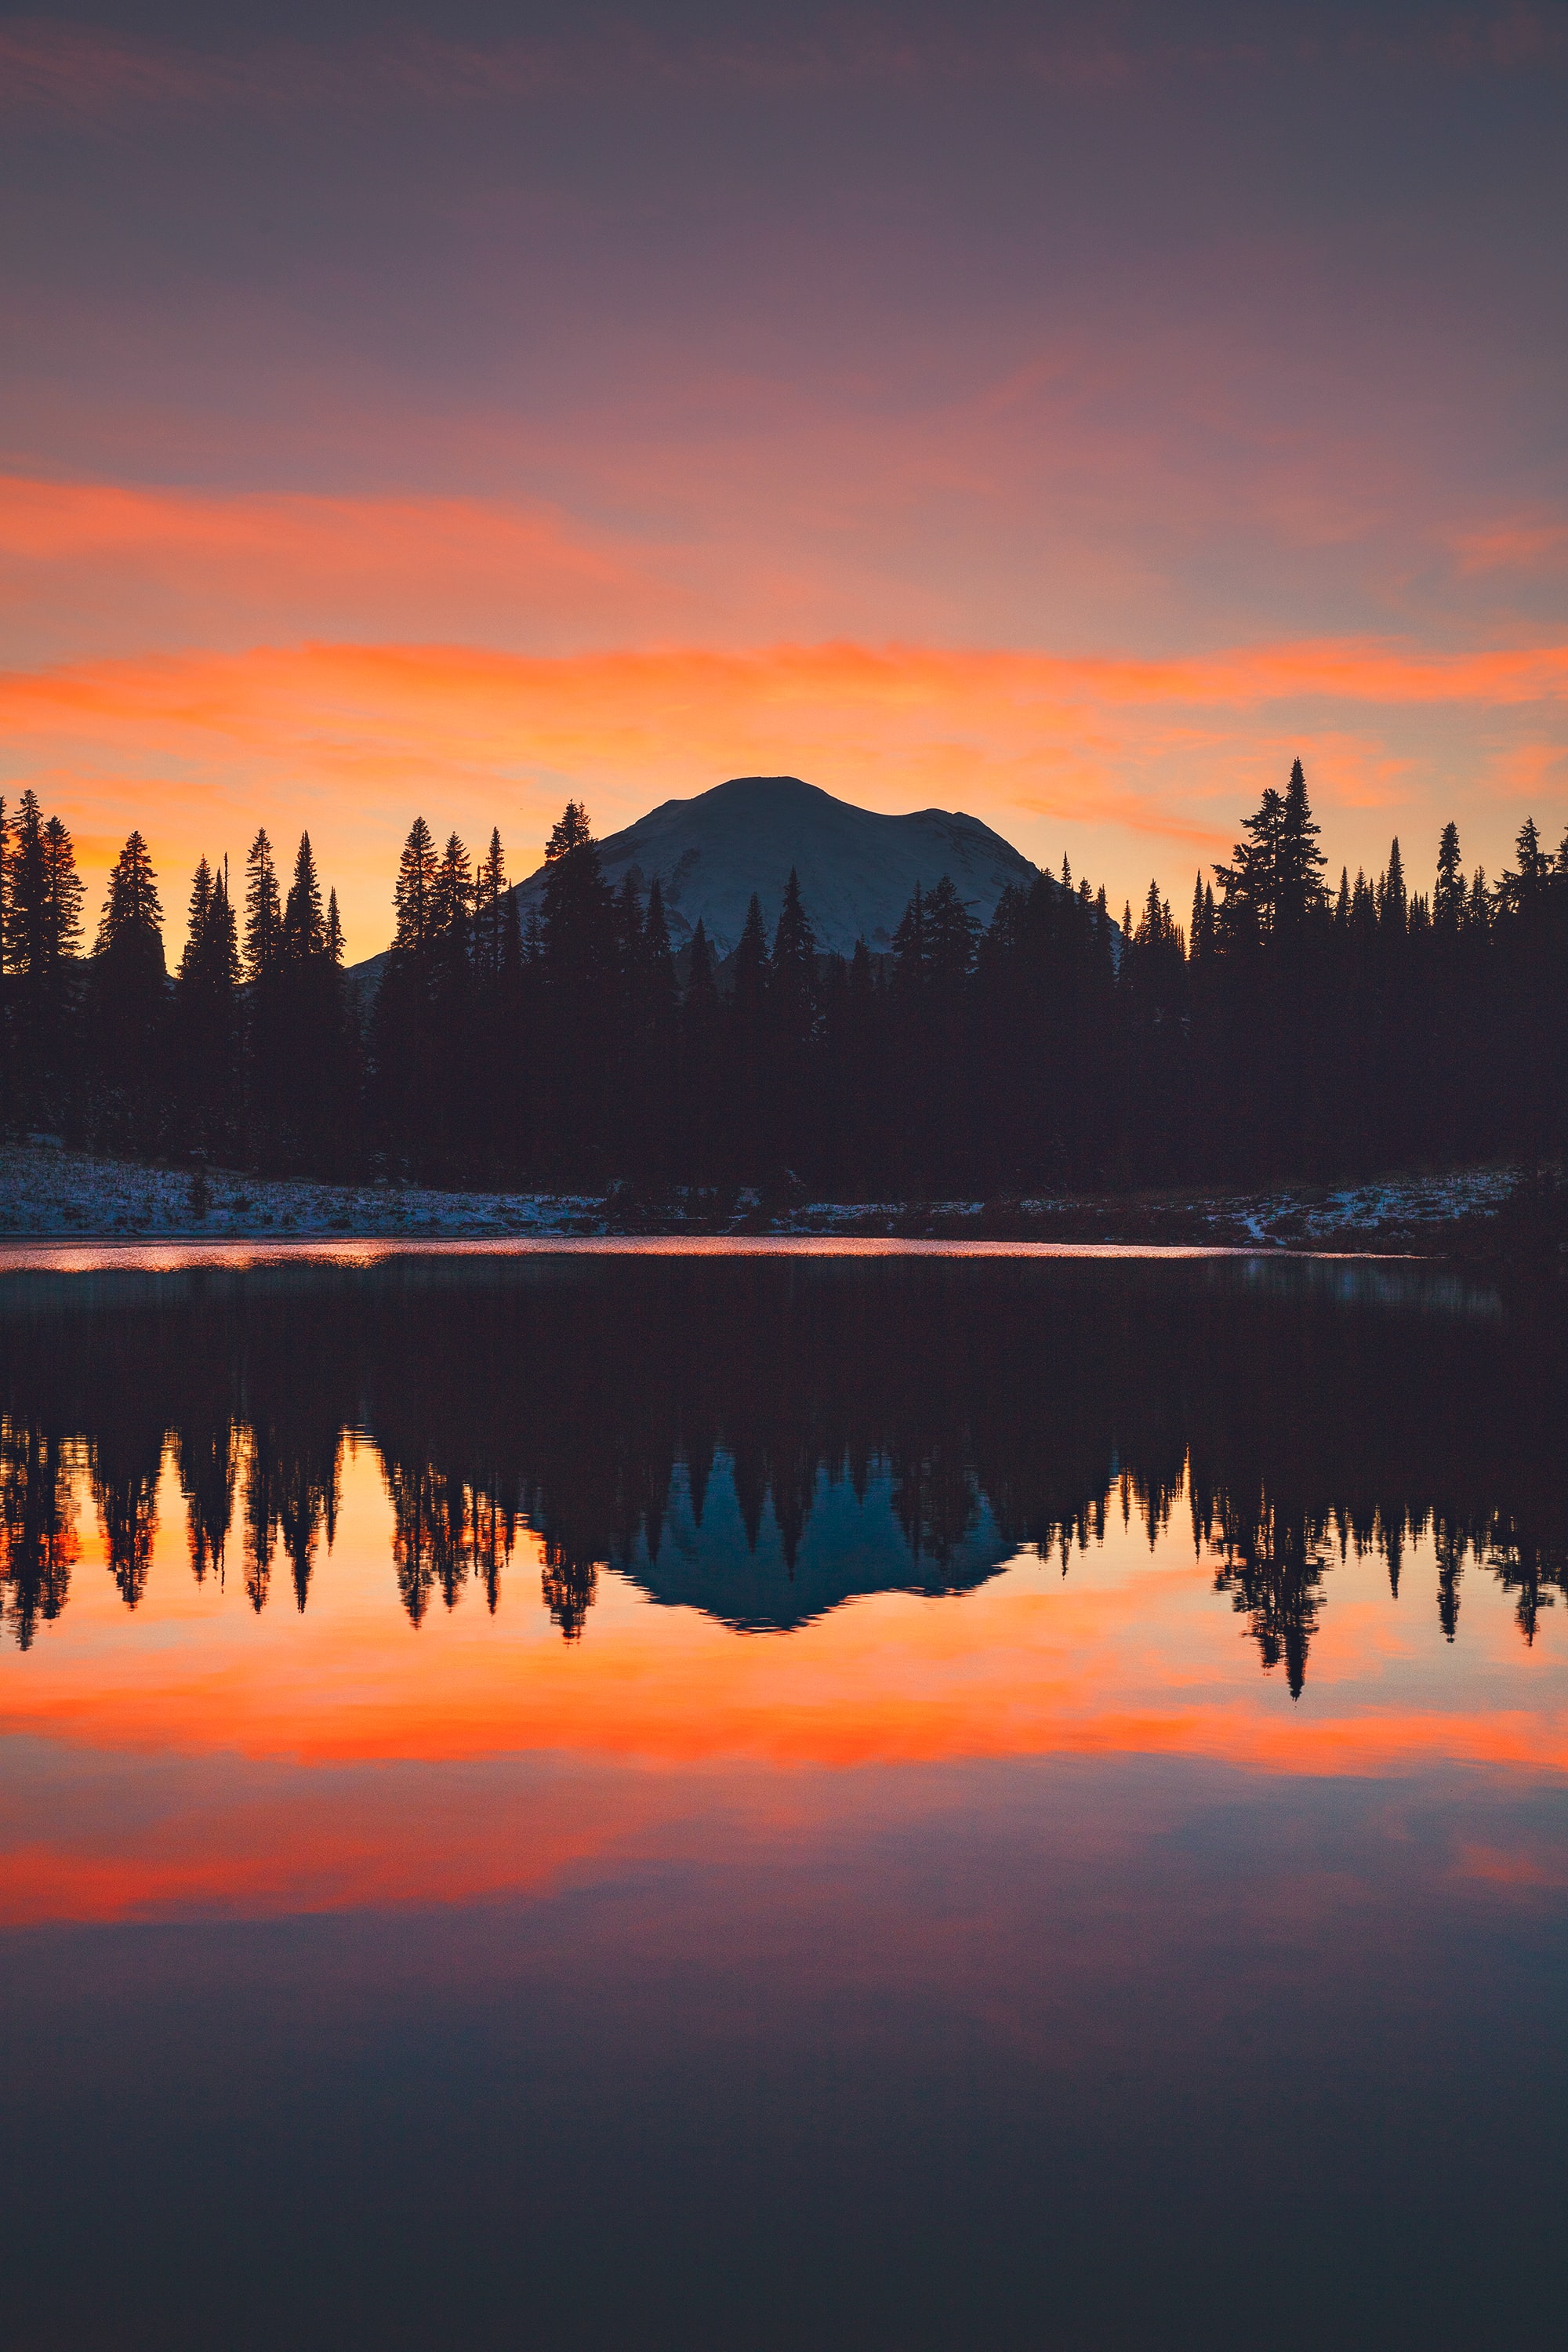 sunset, nature, trees, sky, mountains, reflection